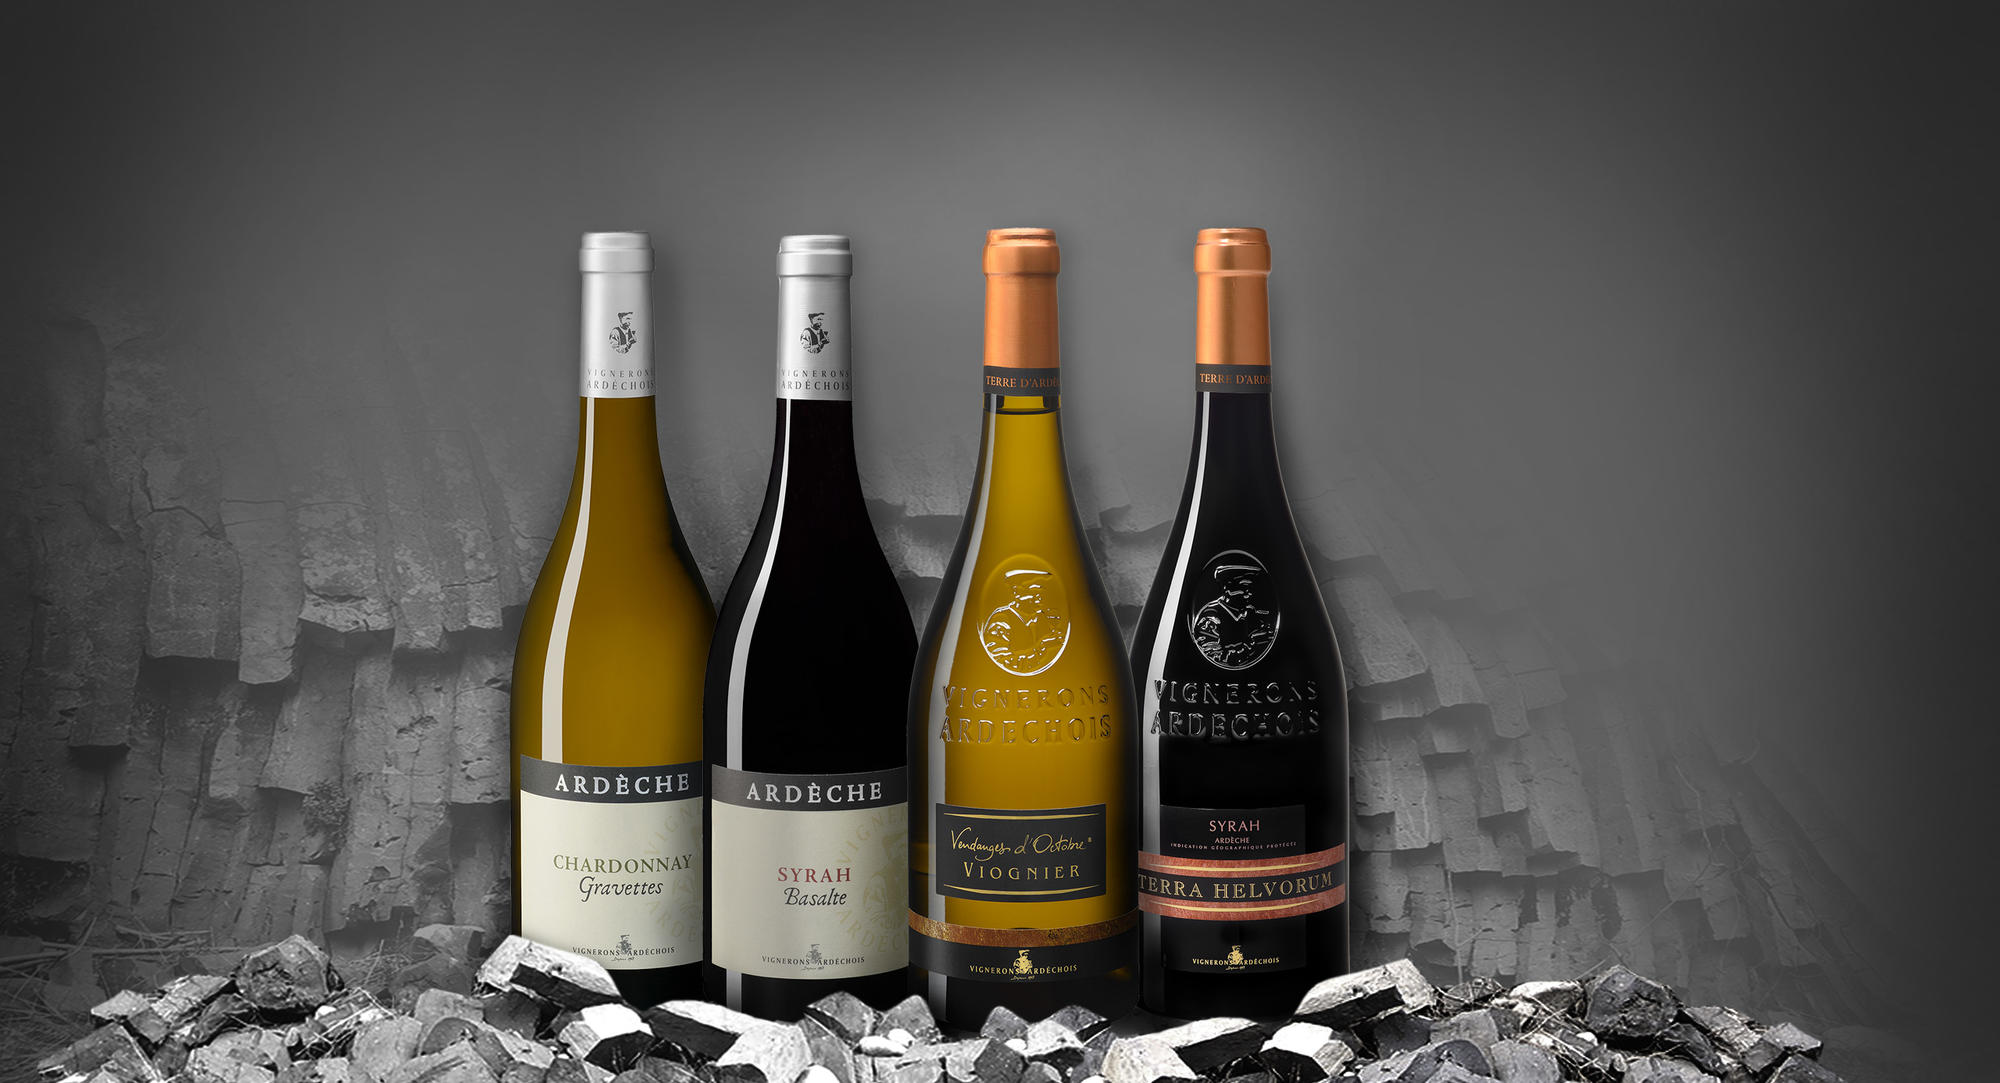 Discover our wines from this terroir